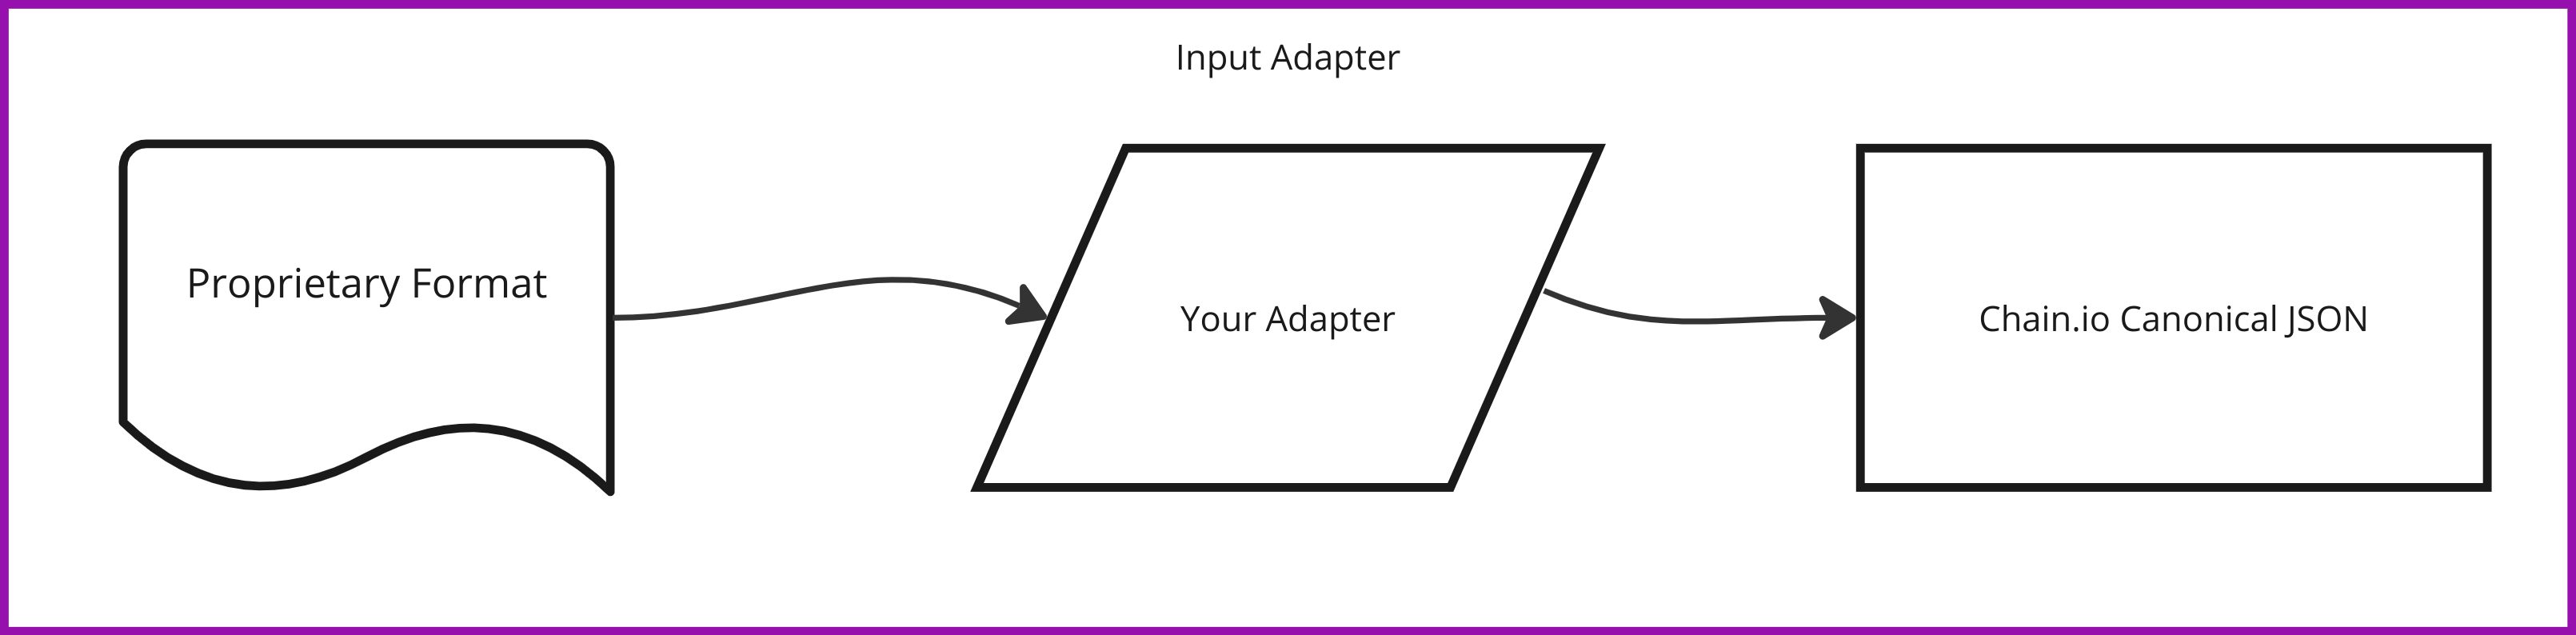 Diagram showing the life-cycle of an input adapter